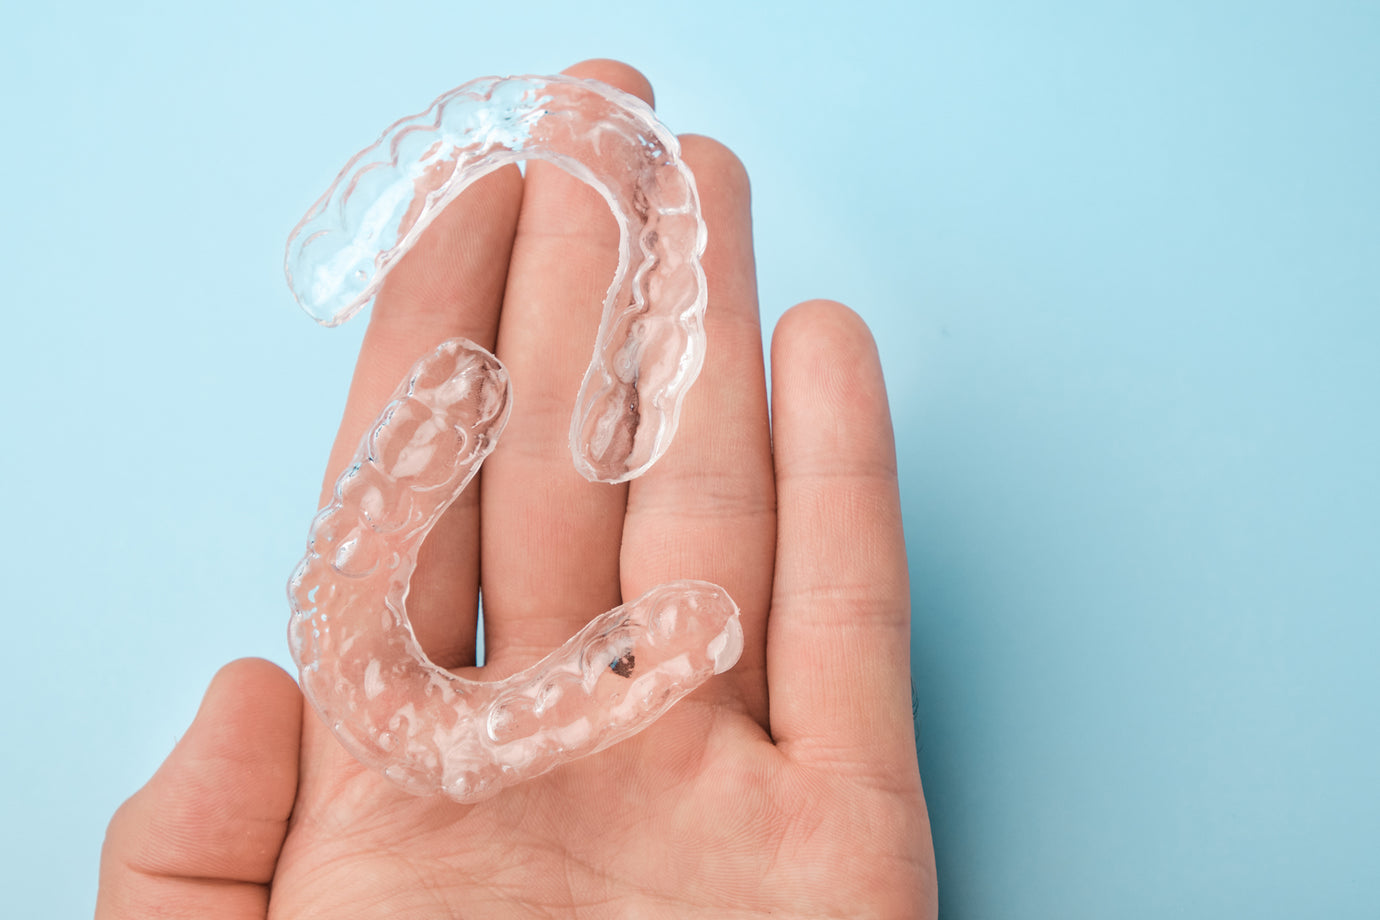 Smile Provide vs. Invisalign: What's the Difference?